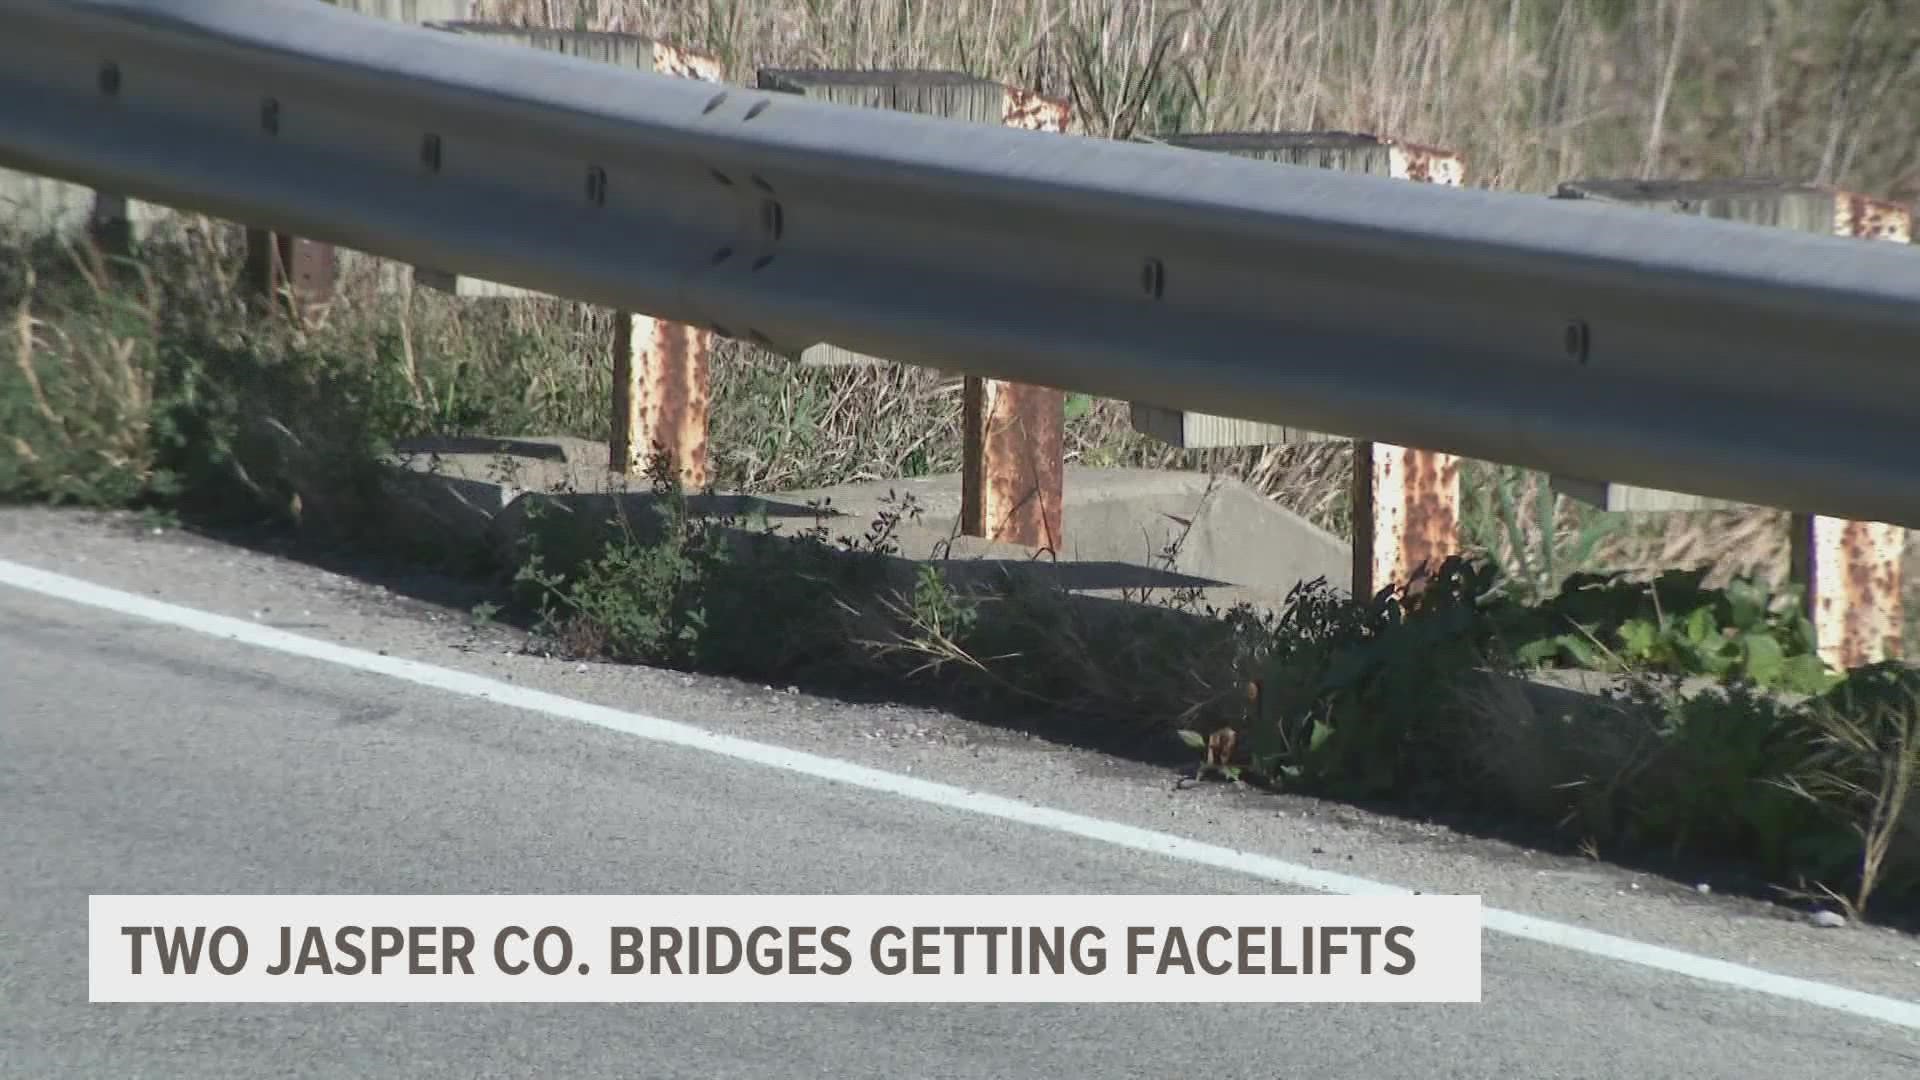 County officials said construction for both of the bridges will cost nearly $2.5 million.